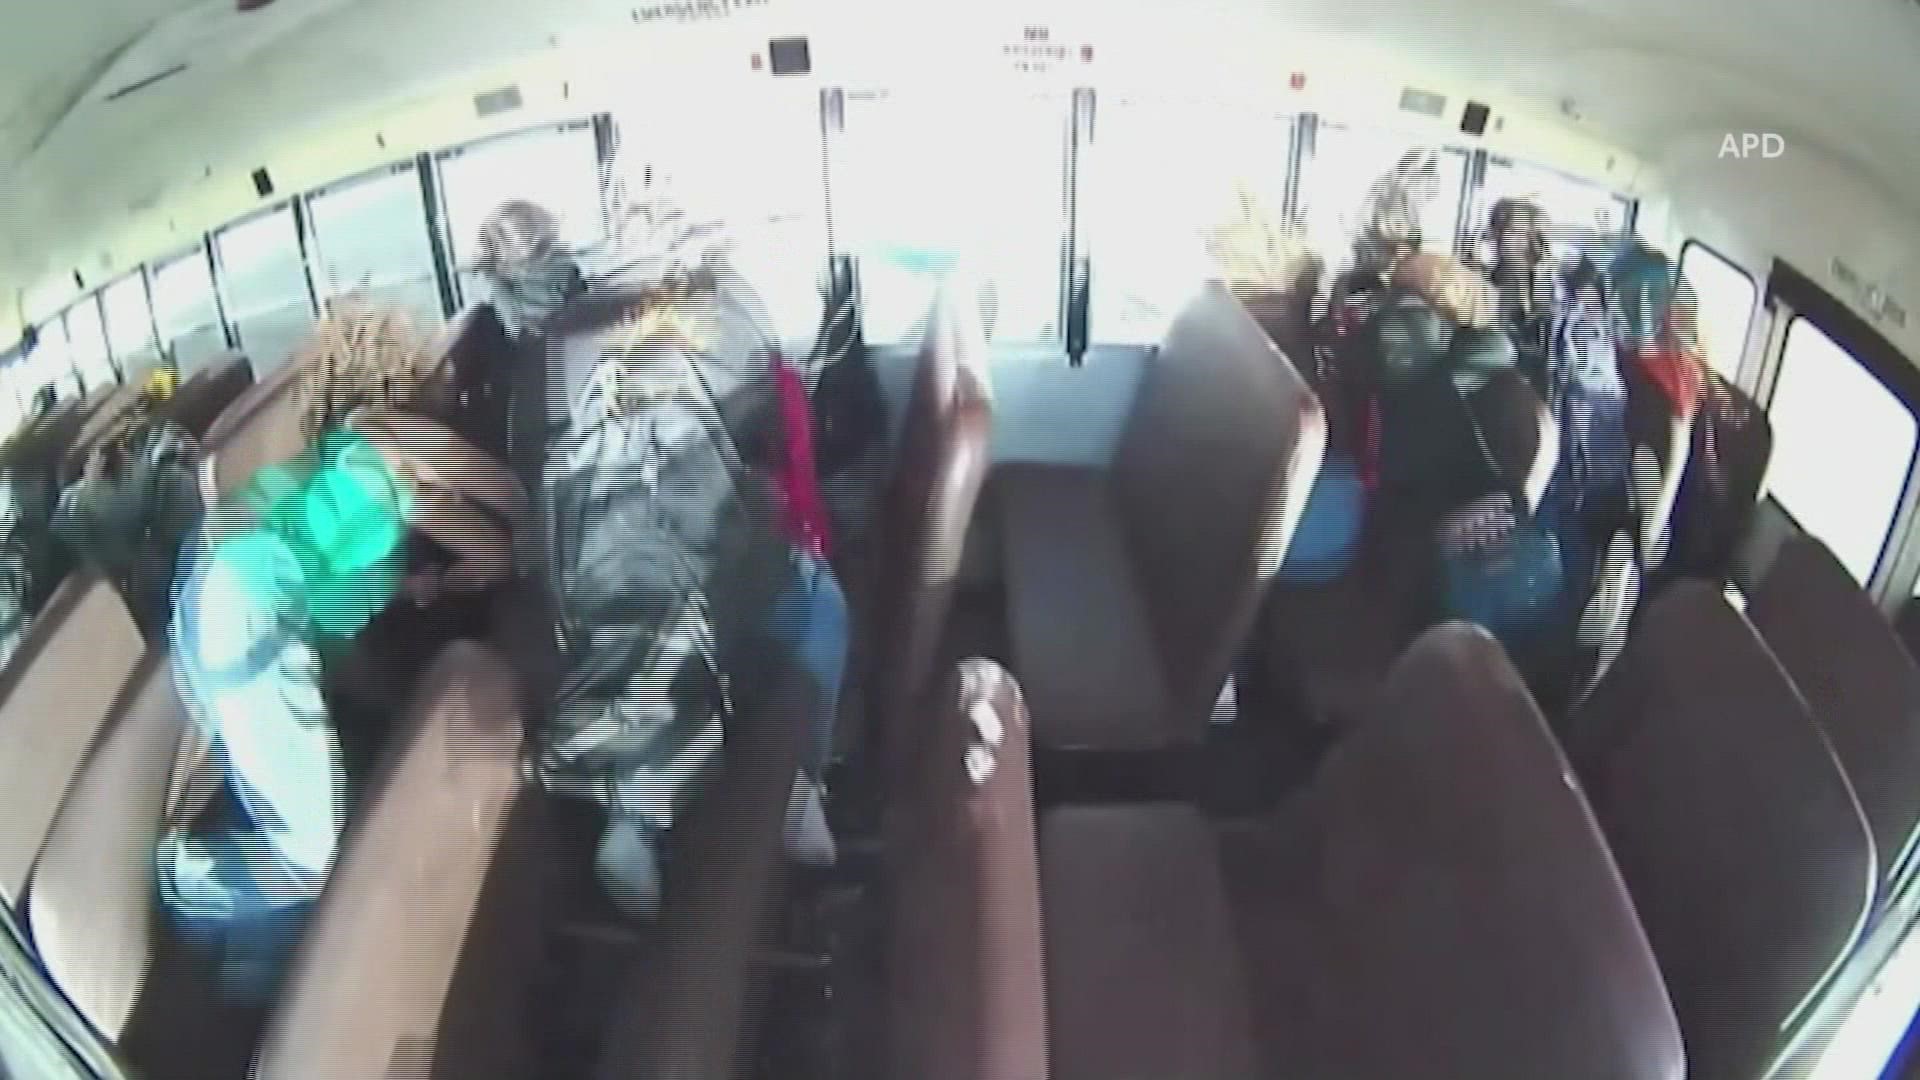 Video released by the Albuquerque Police Department showed the moment a racing car slammed into a school bus, causing it to turn on its side.